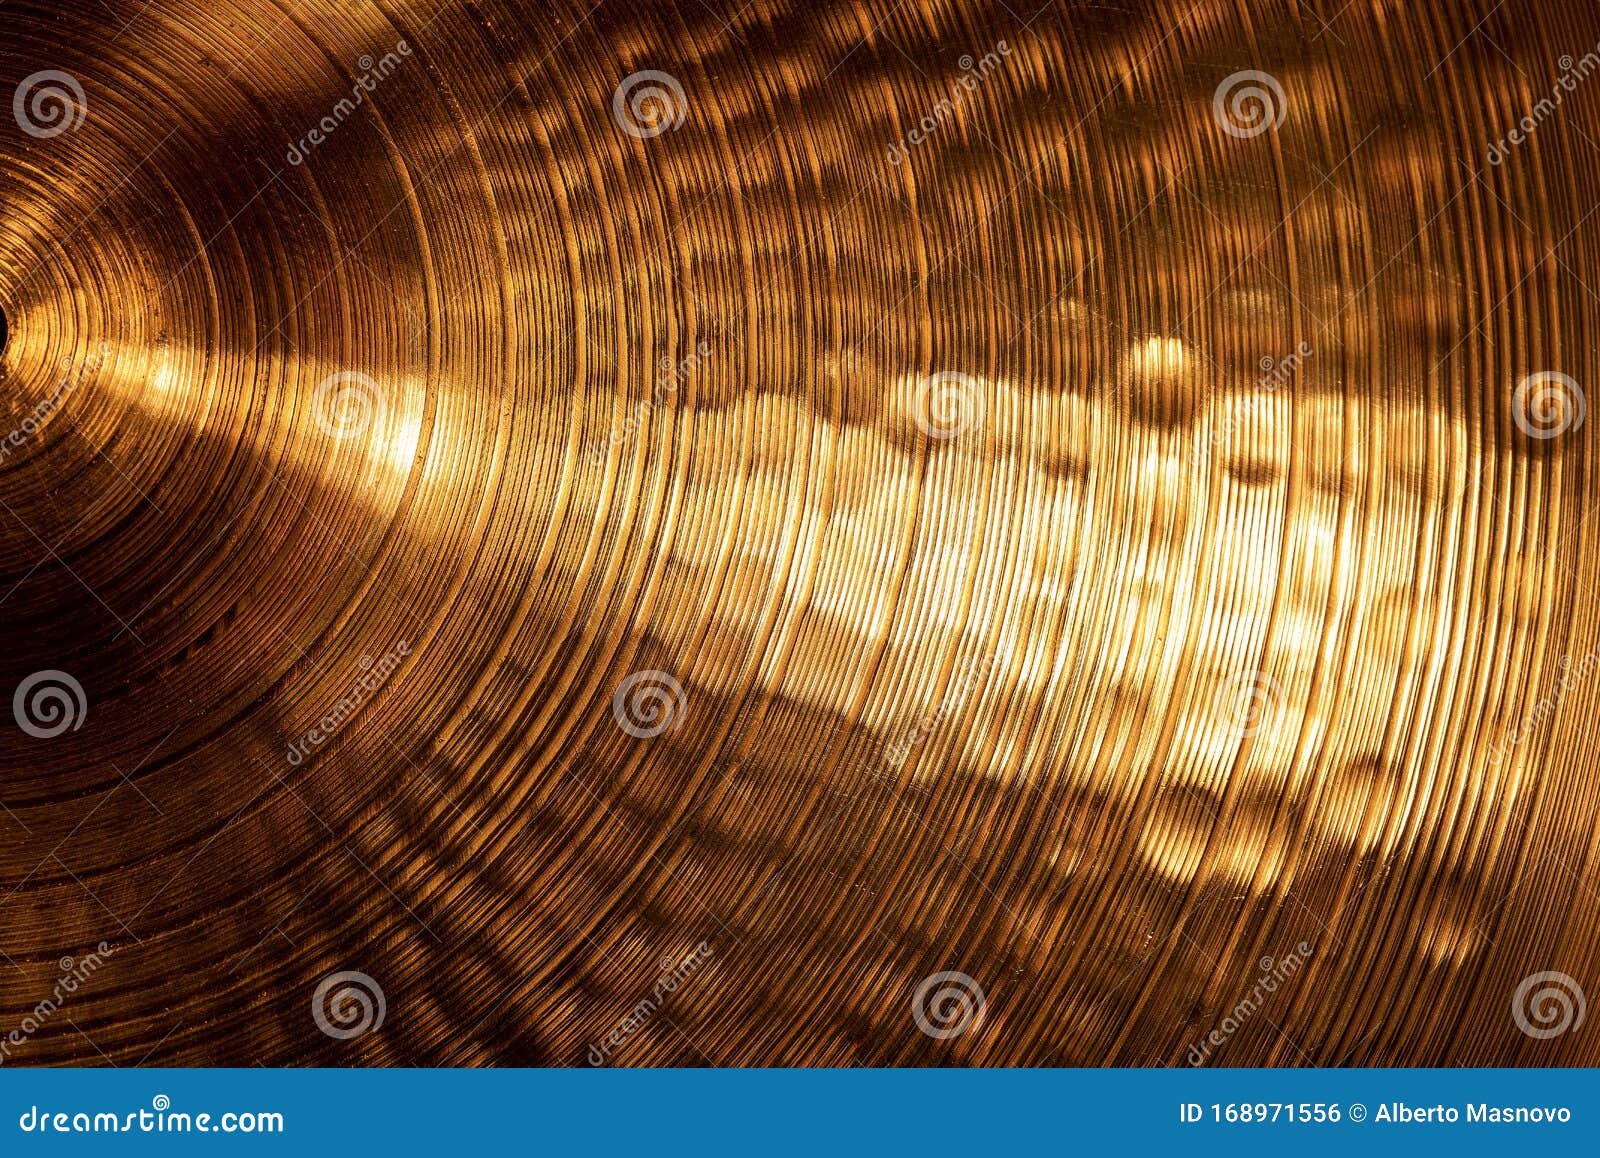 extreme close-up of an old golden cymbal of drum kit